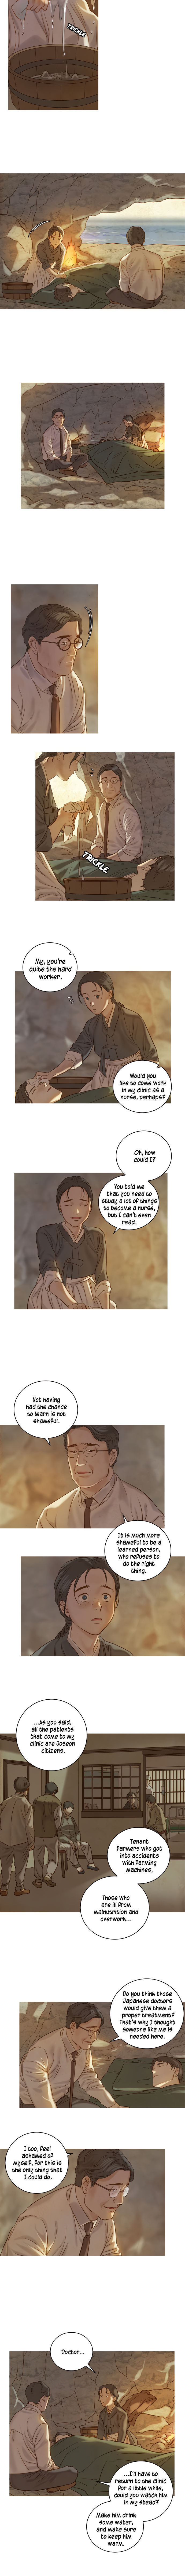 Gorae Byul - The Gyeongseong Mermaid - Chapter 2 Page 3